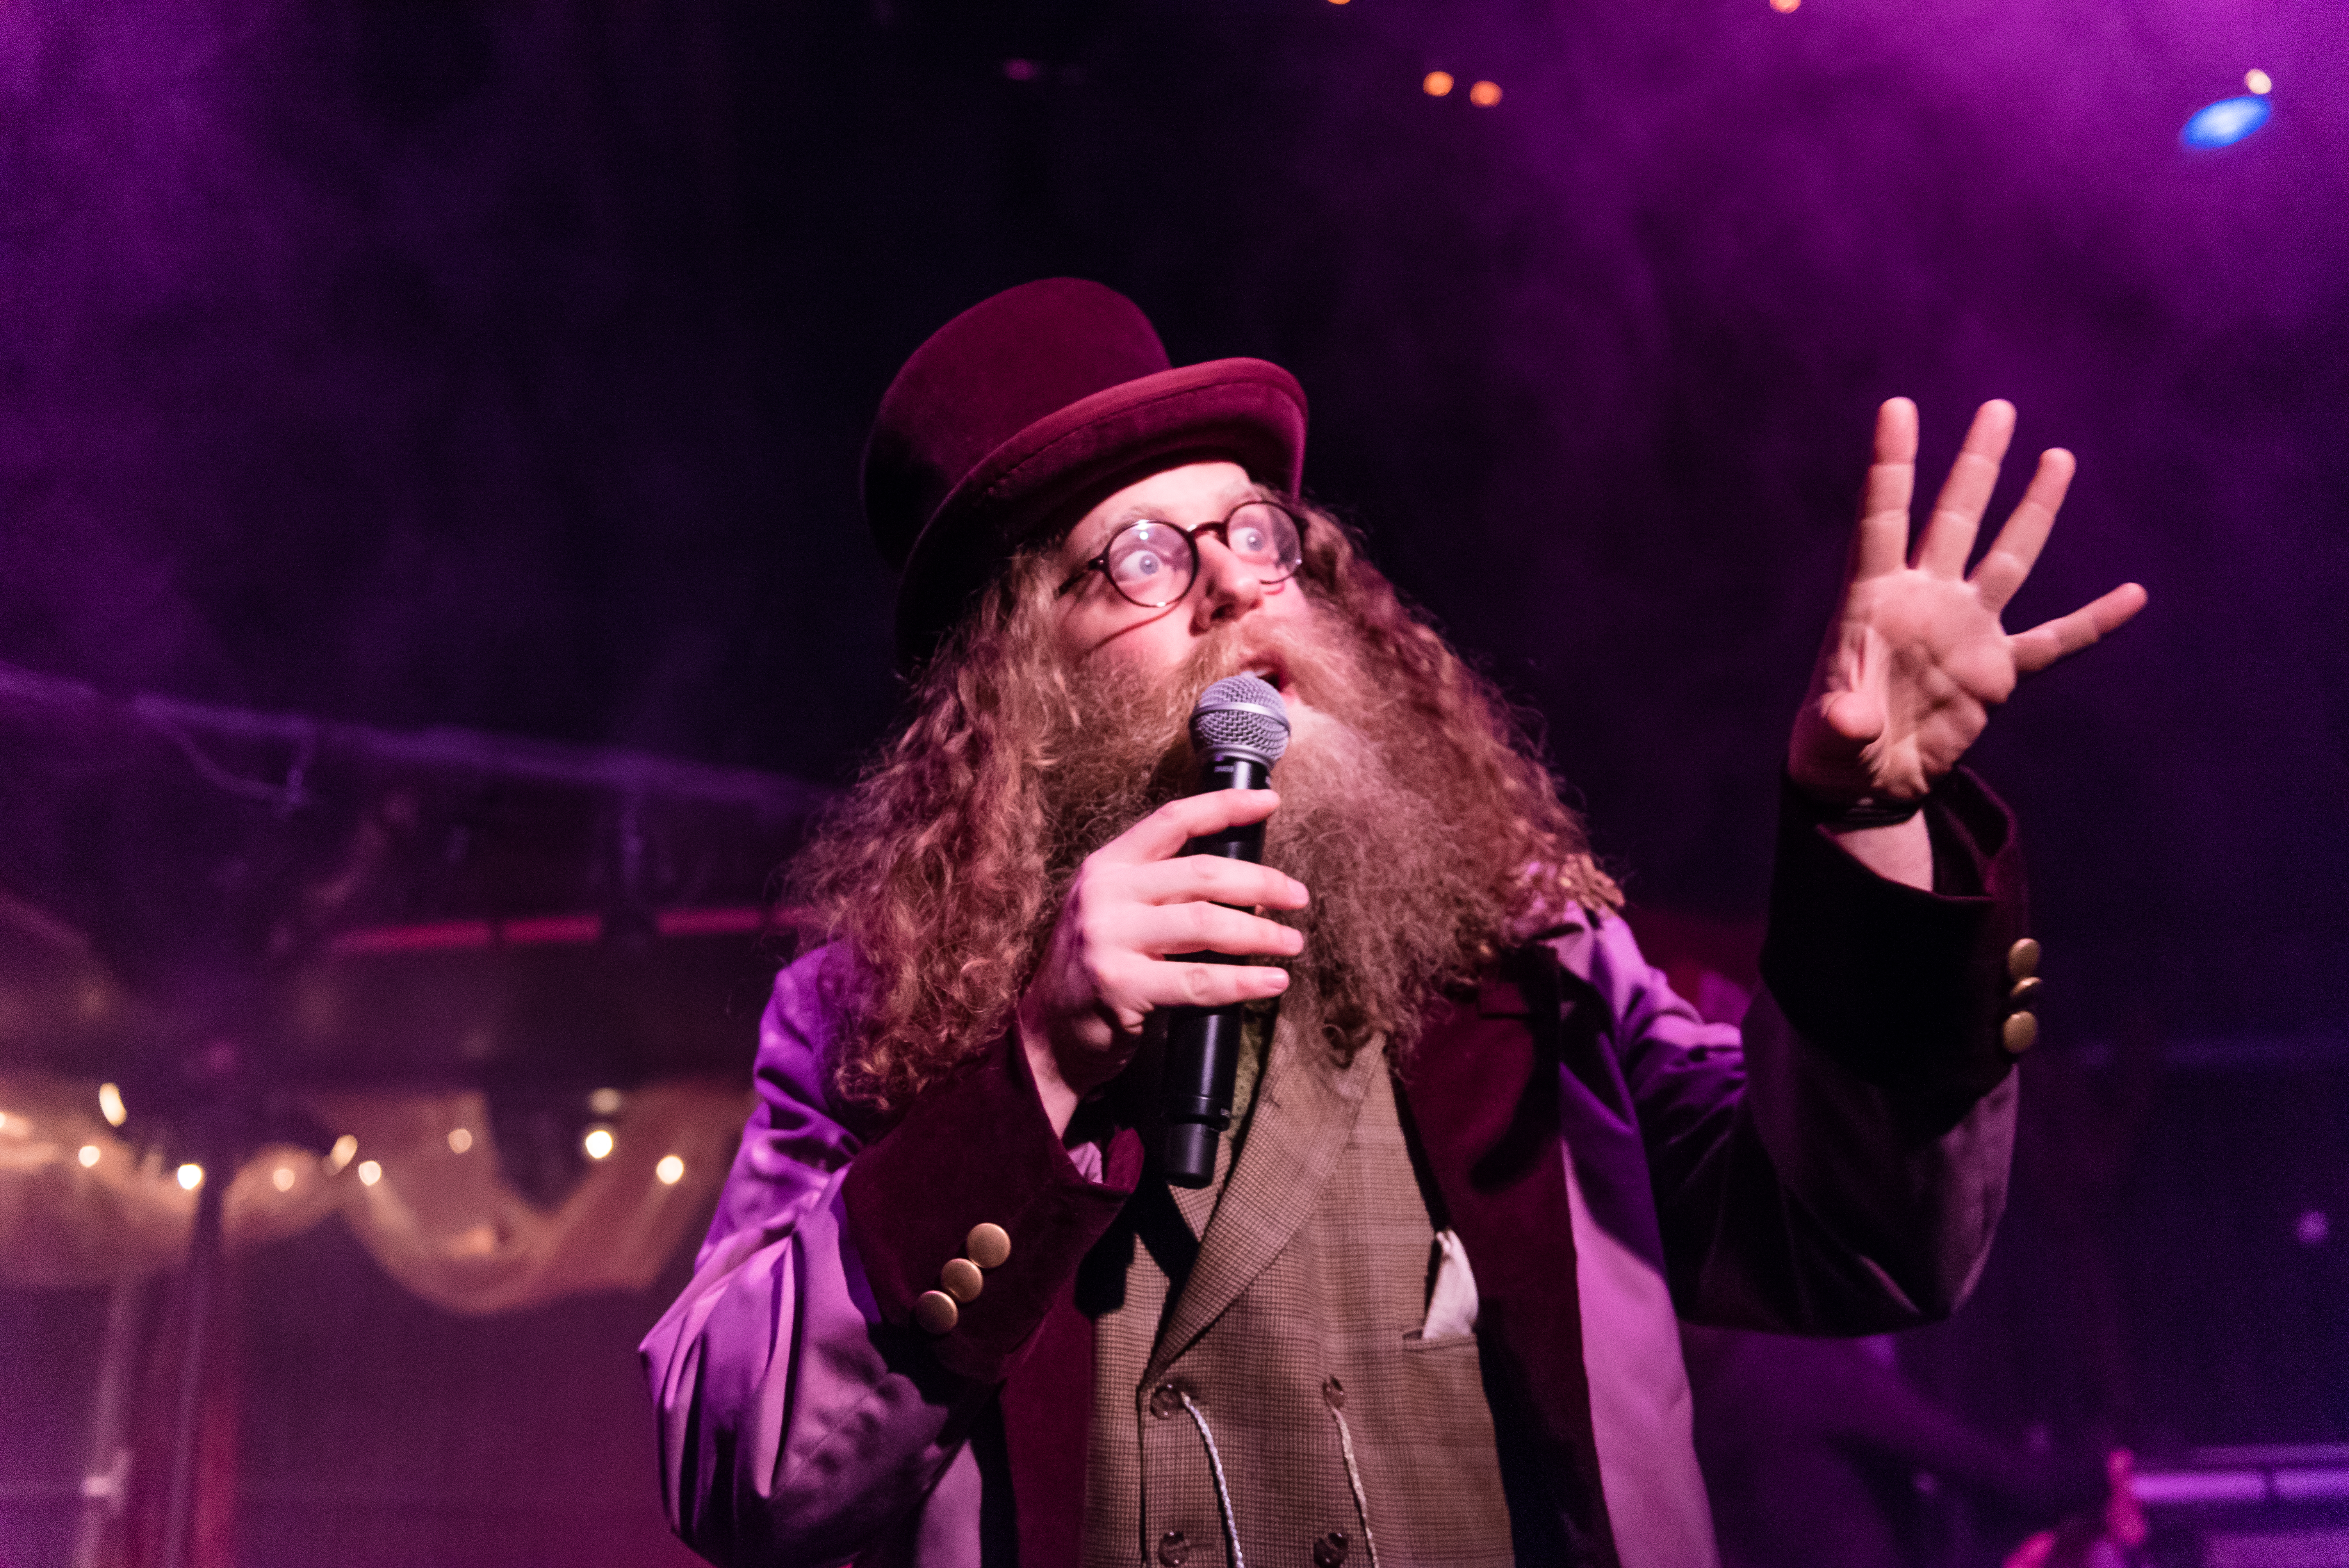 Ben Caplan speaking into a microphone looking out at an audience